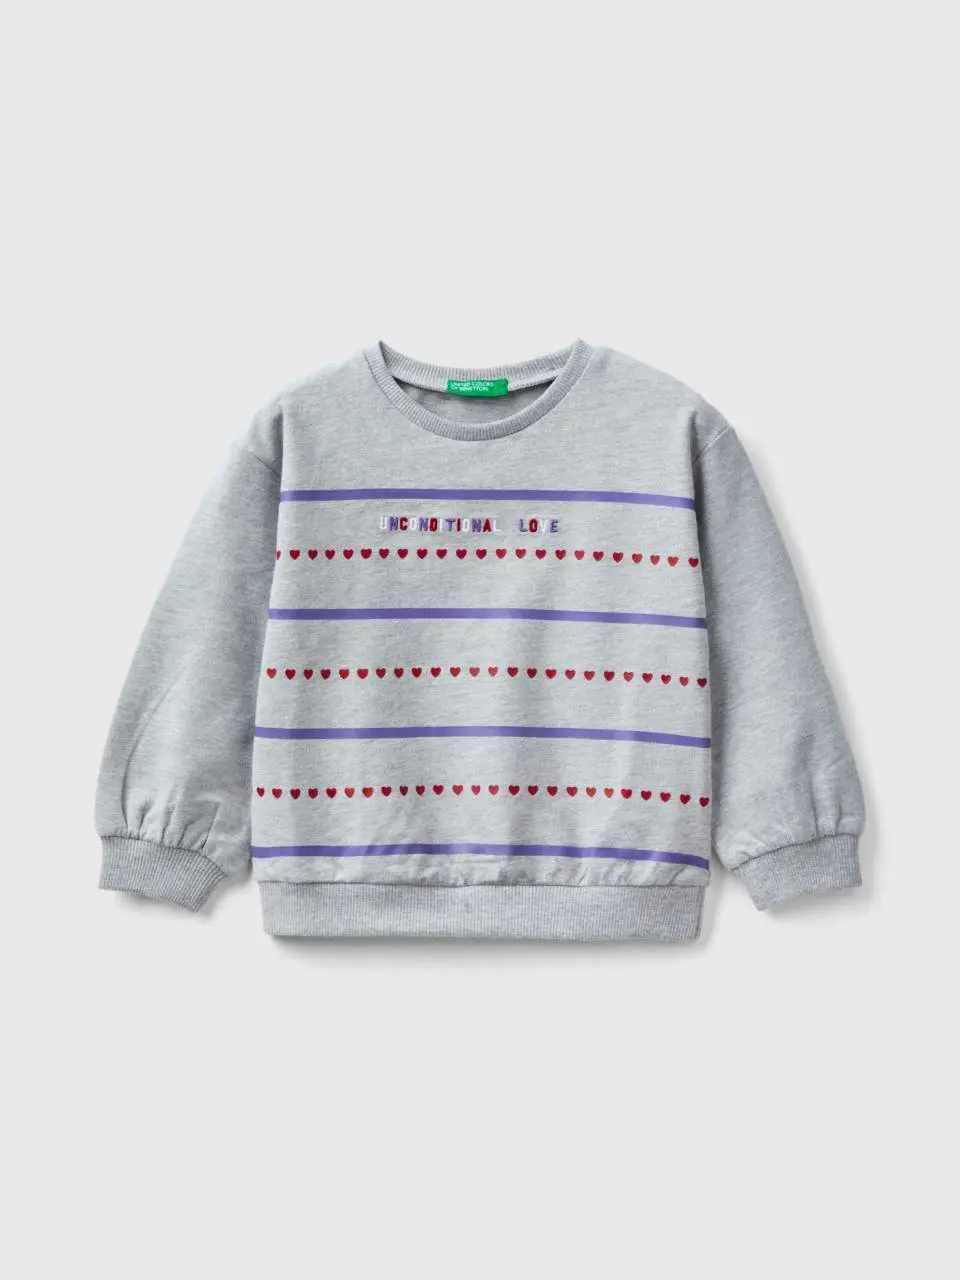 Benetton sweatshirt with print and embroidery. 1